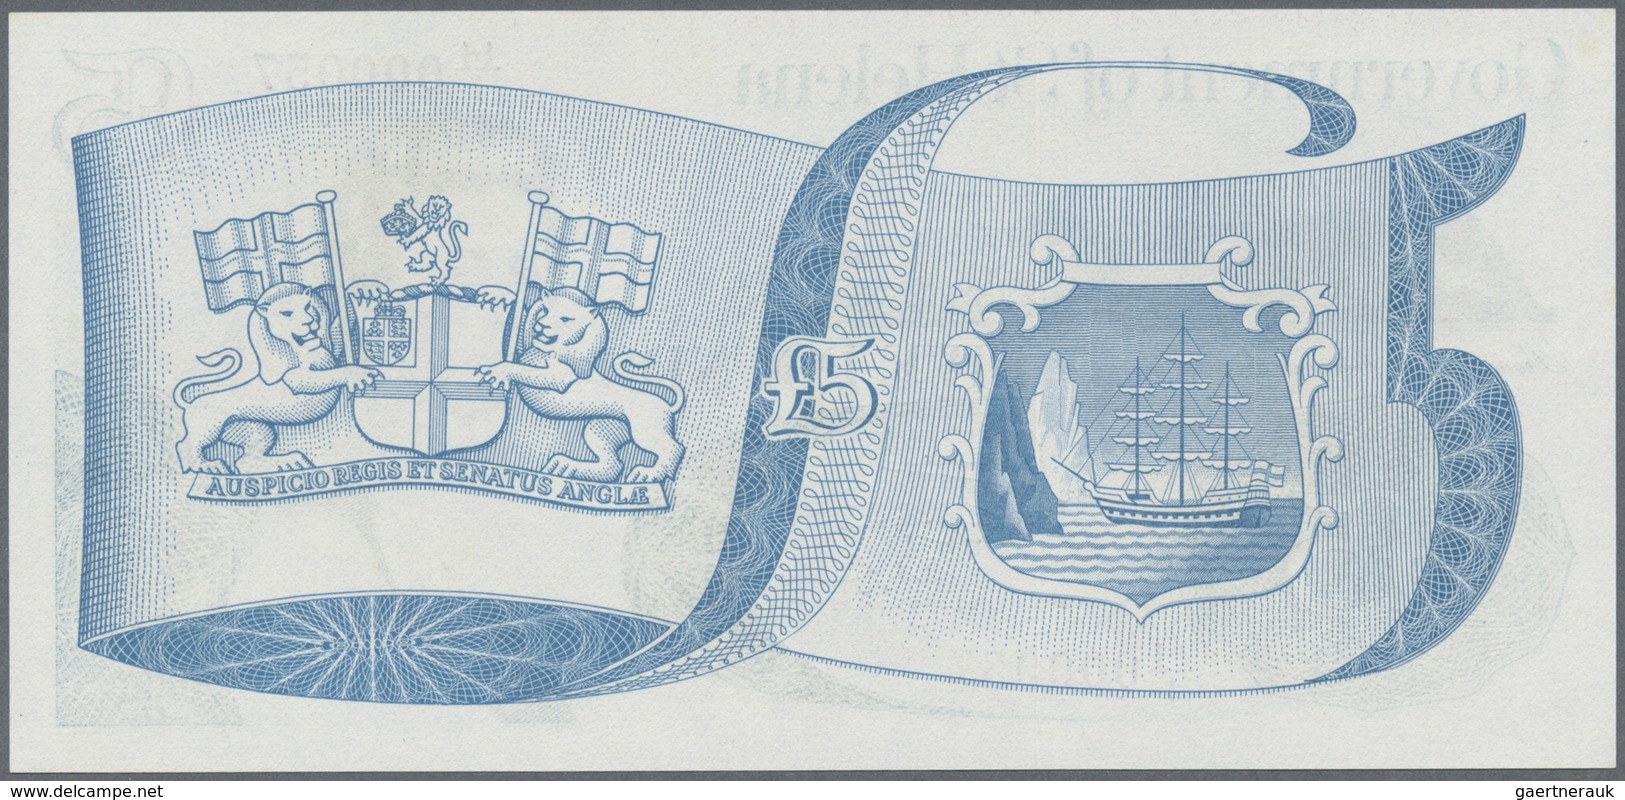 St. Helena: Set with 4 Banknotes with Matching First Prefix Low Serial Number 50 Pence, 1 Pound, 5 P